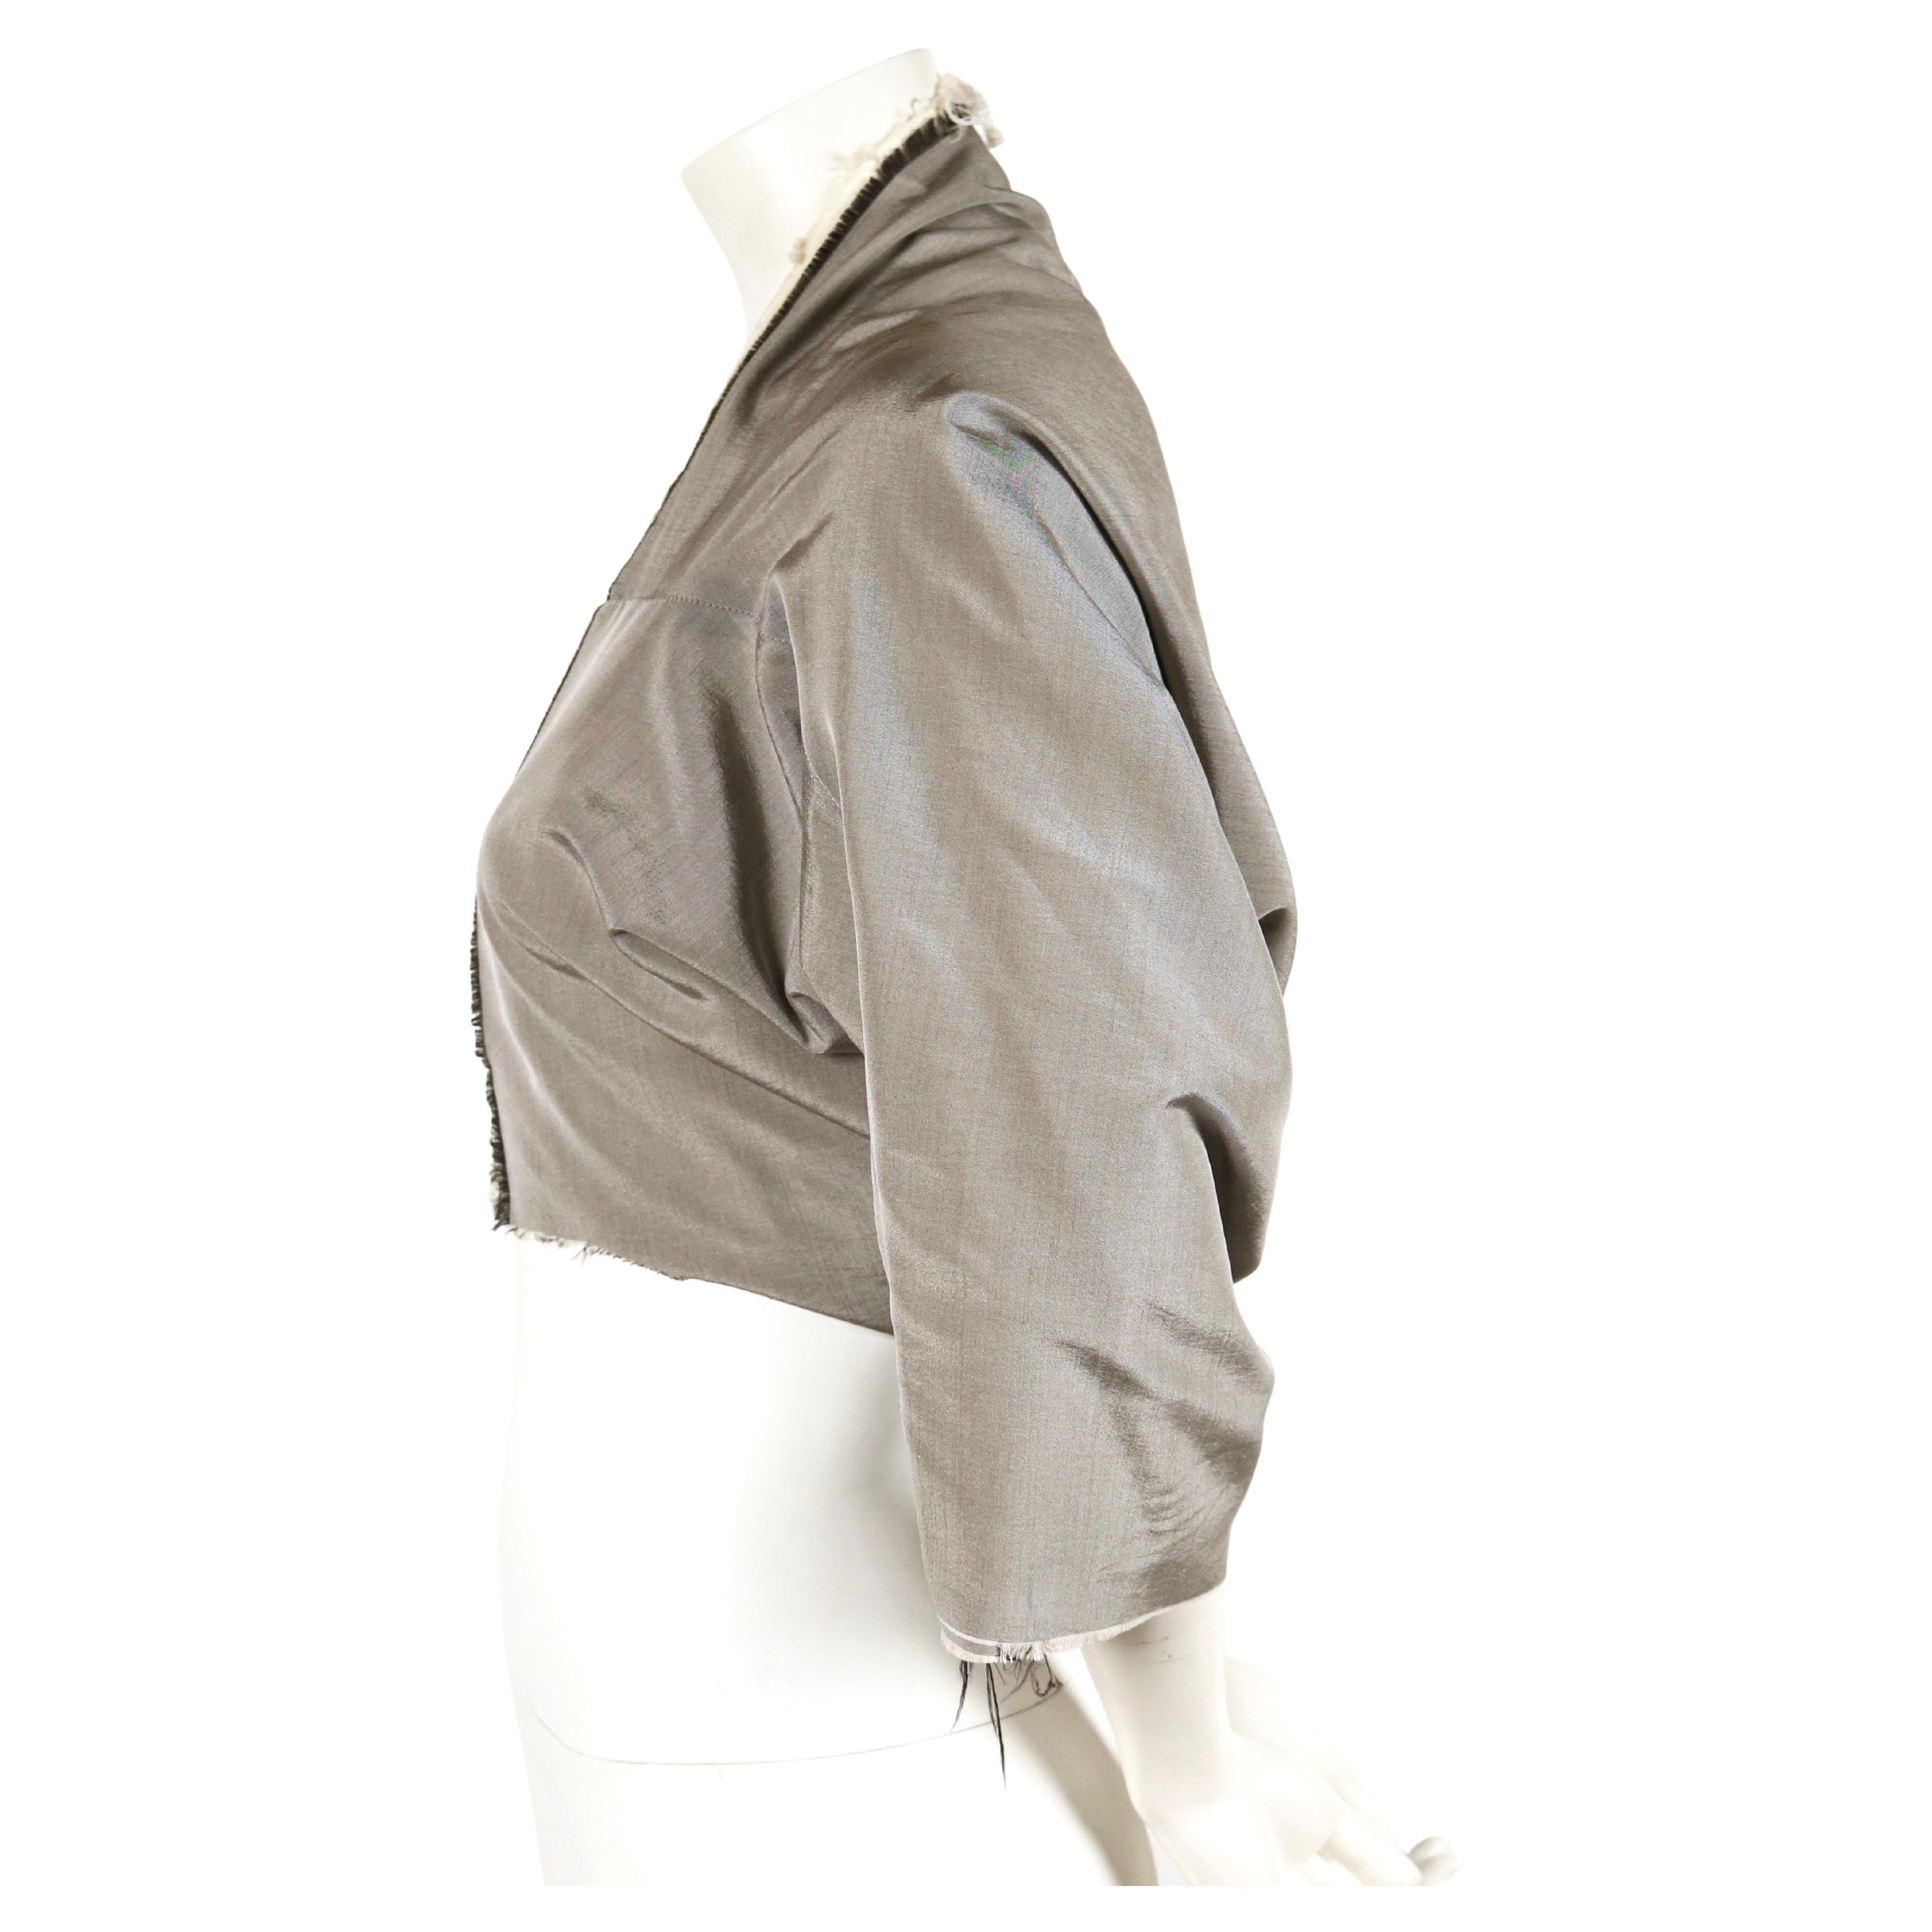 Iridescent grey shrug designed by Rei Kawakubo for Comme Des Garcons dating to fall of 1998. Size 'M', however this best fits a size XS or S. Raw edges. Open closure. Made in Japan. Very good condition. 